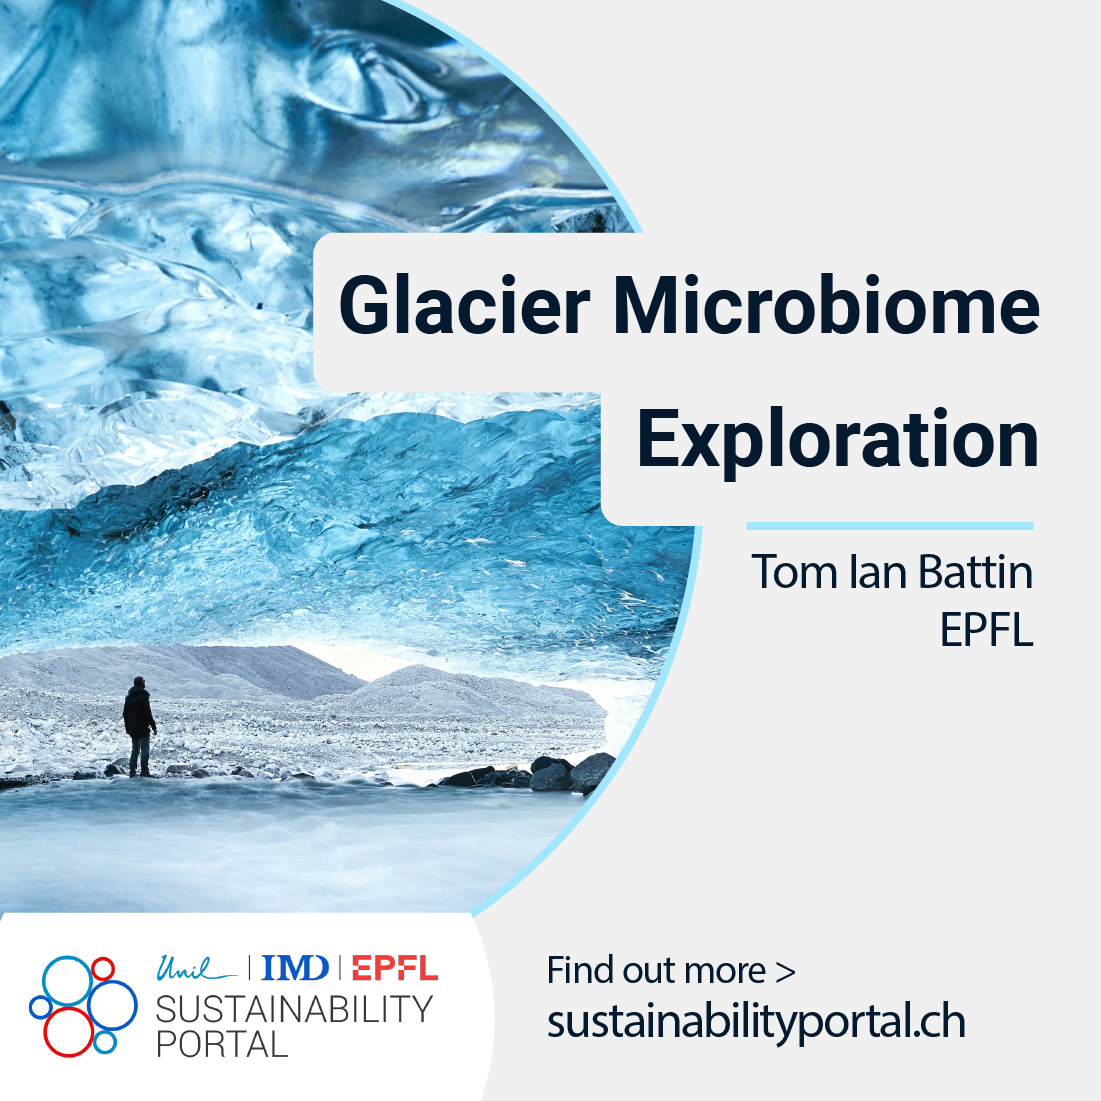 Explore sustainable business strategies, mountain life's evolution, and glacier microbiomes on the #SustainabilityPortal. Three projects for a more resilient future! 🌱🏔️❄️

#Research #SustainableStrategies #ValHérens #Mountains #Alps #Glaciers